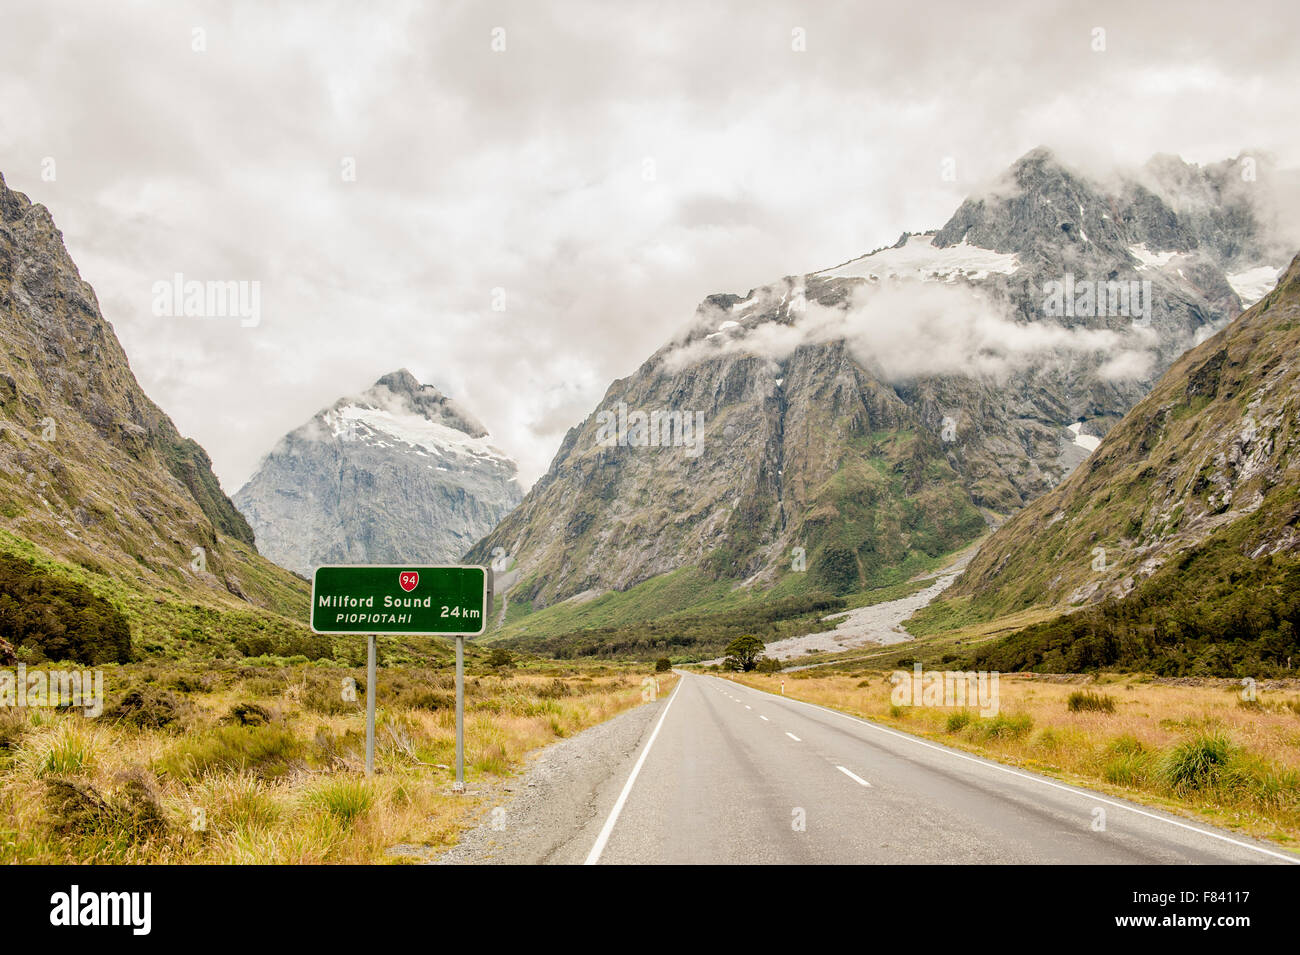 Milford Road, Fiordland National Park, South Island, New Zealand Banque D'Images